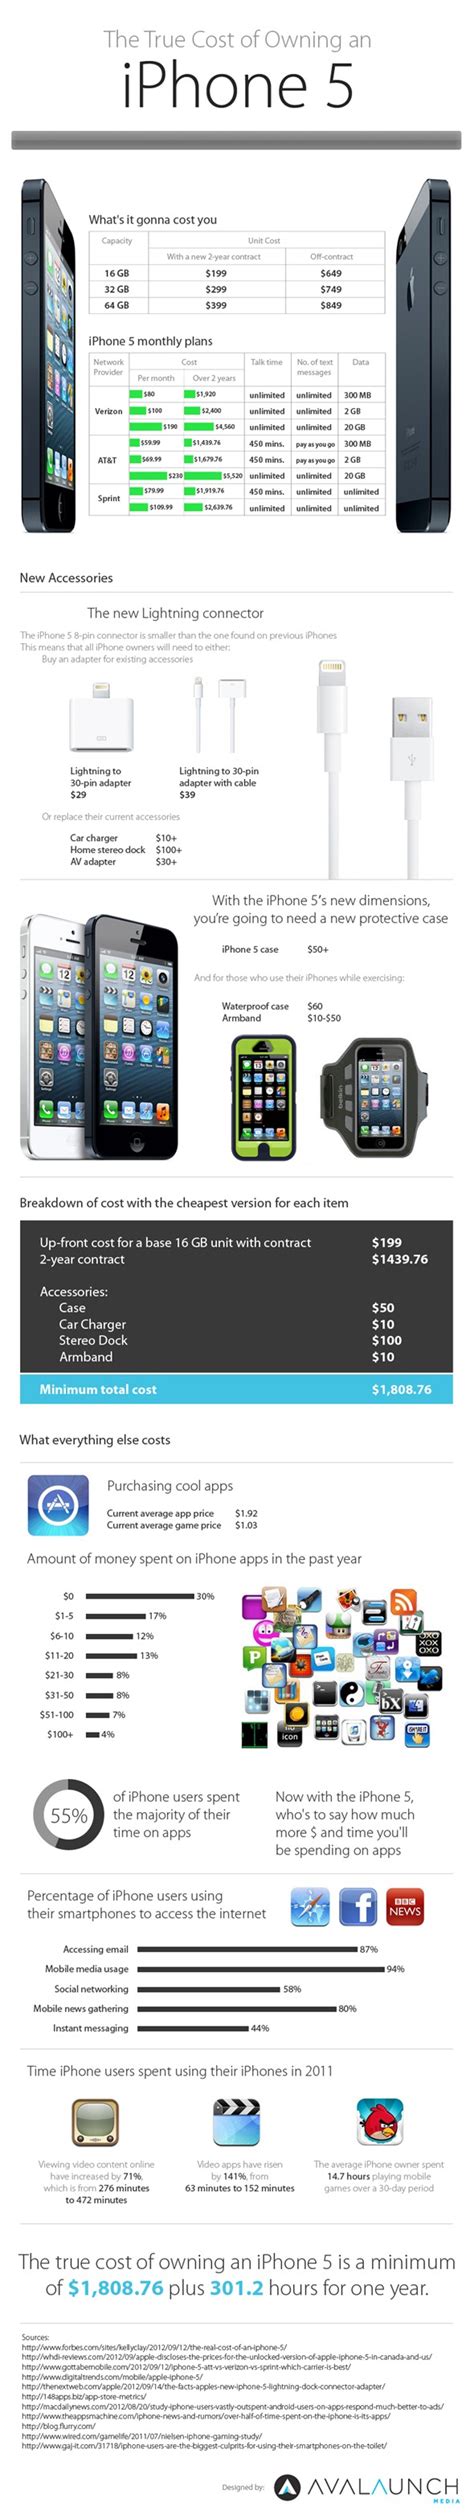 Buying A Subsidized Iphone 5 With A Two Year Contract Can Cost More